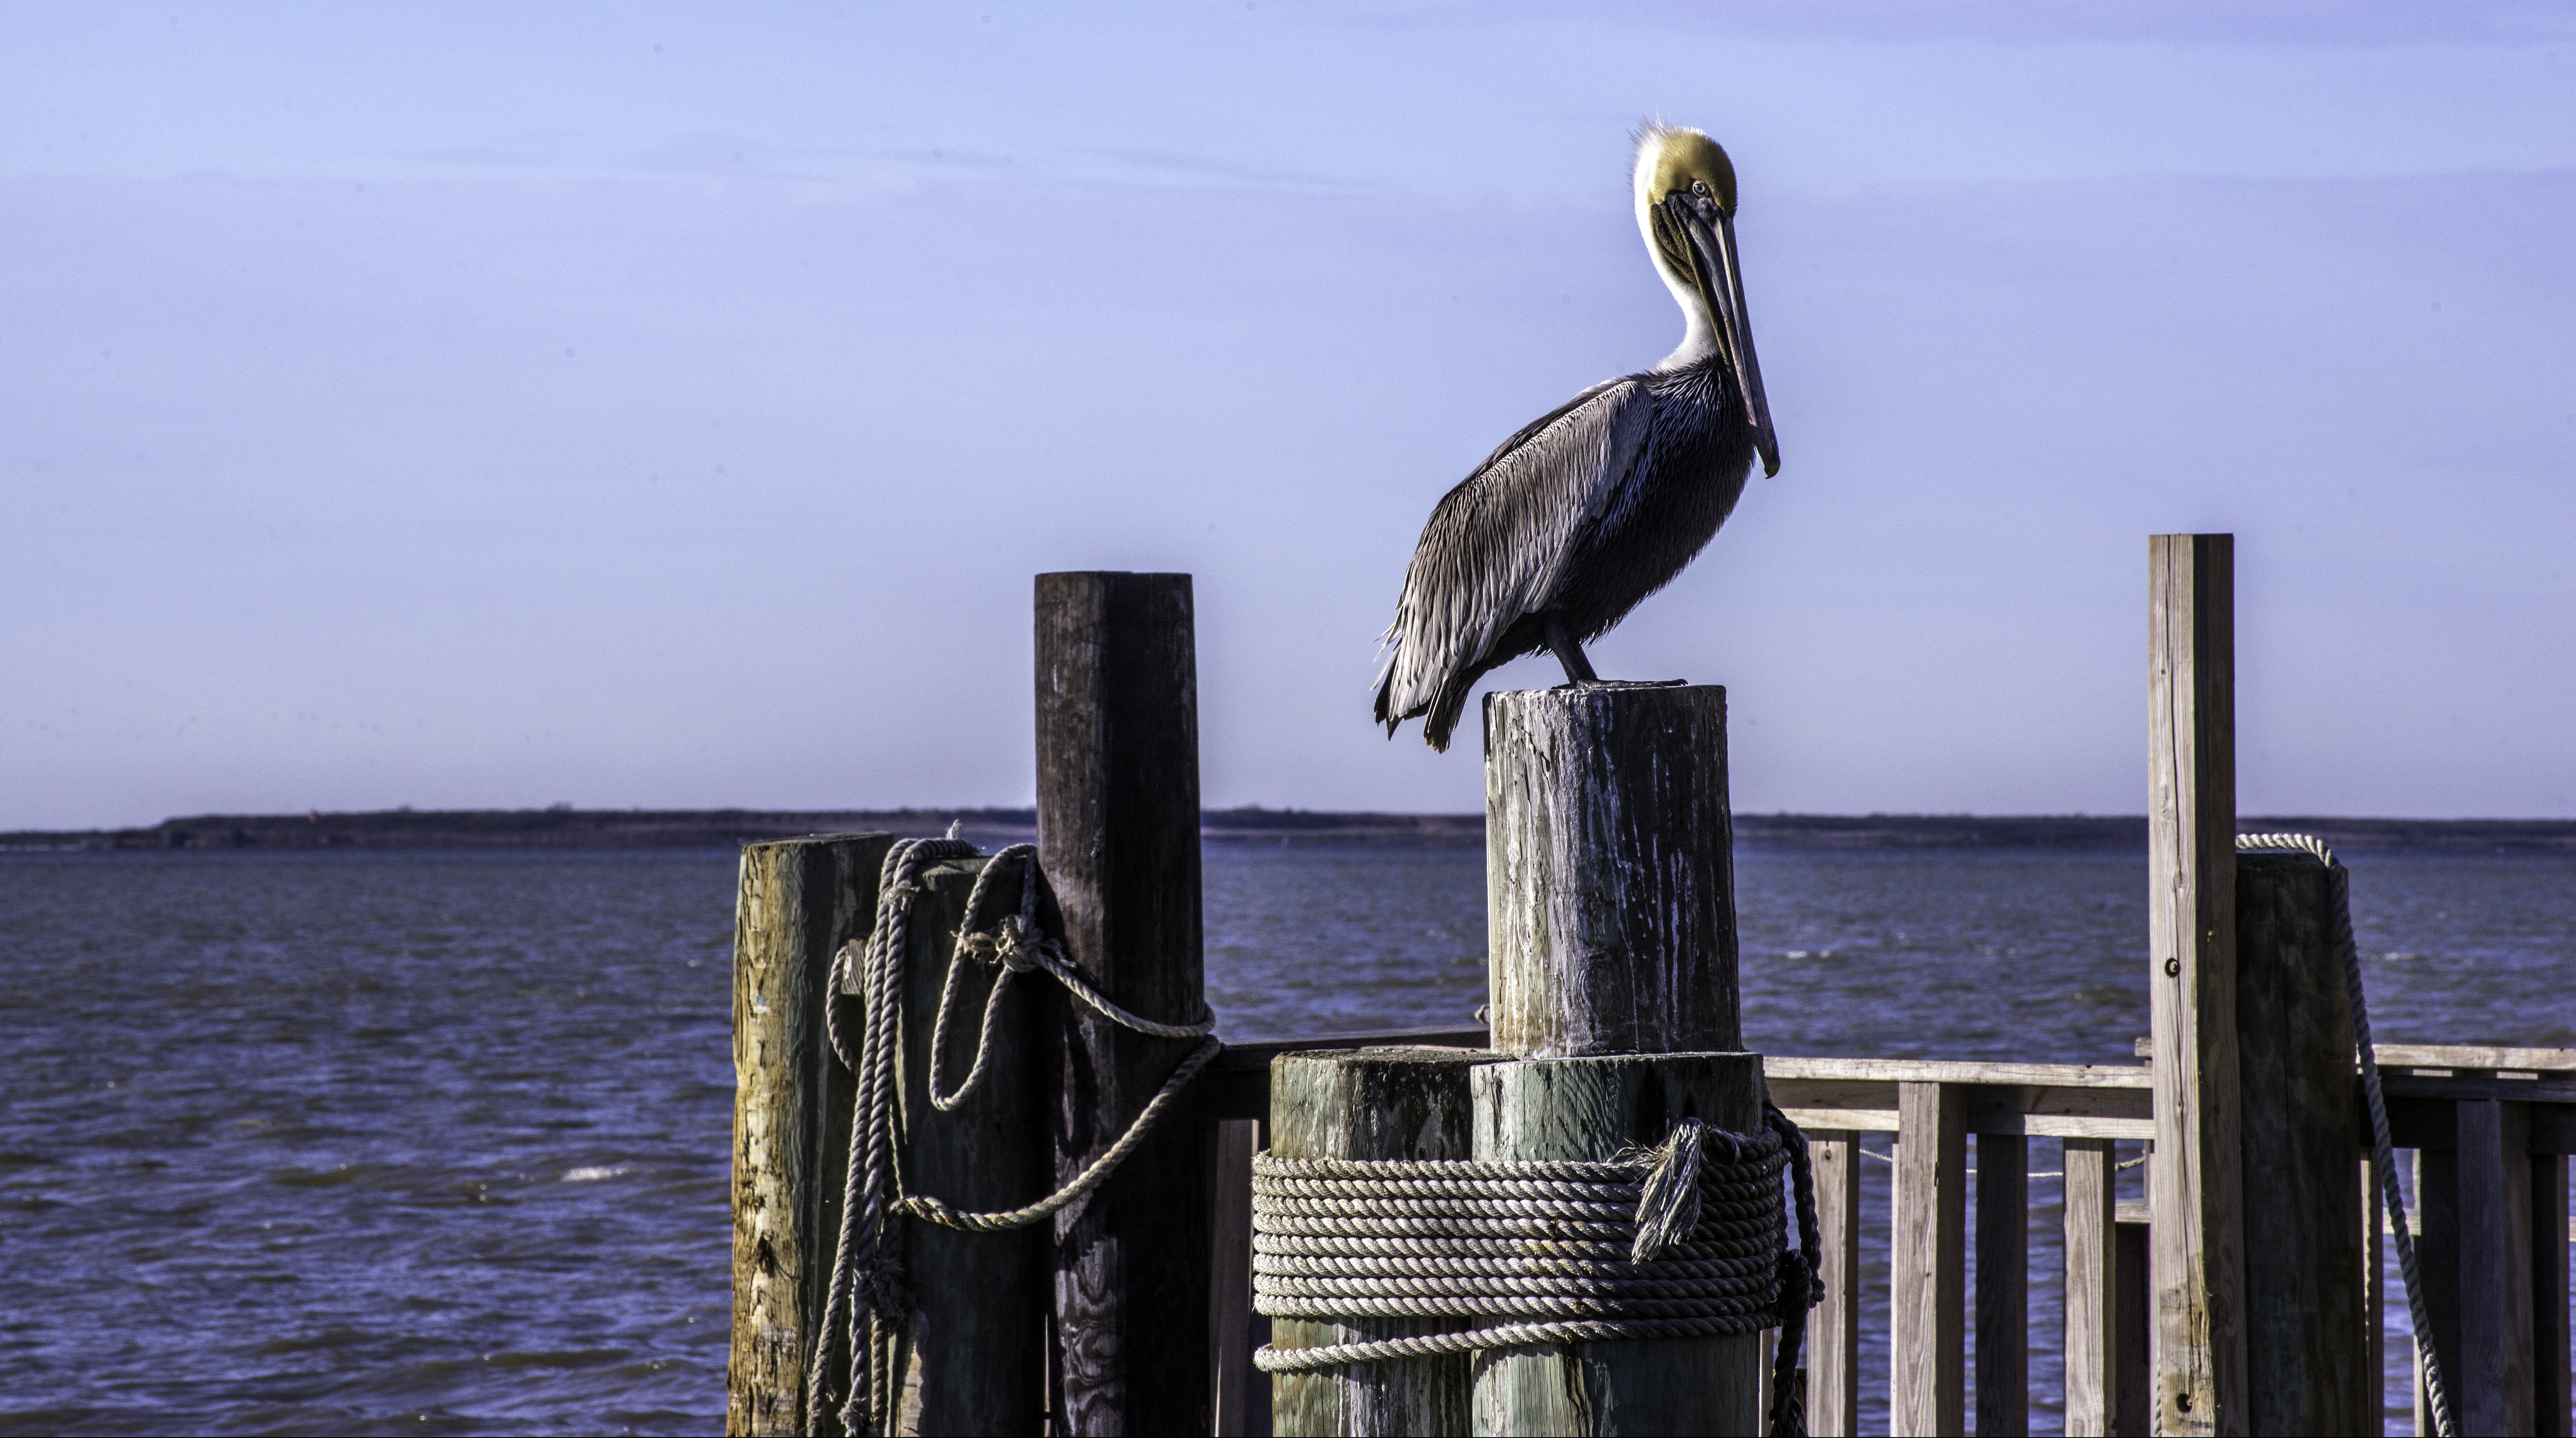 View the native brown pelicans